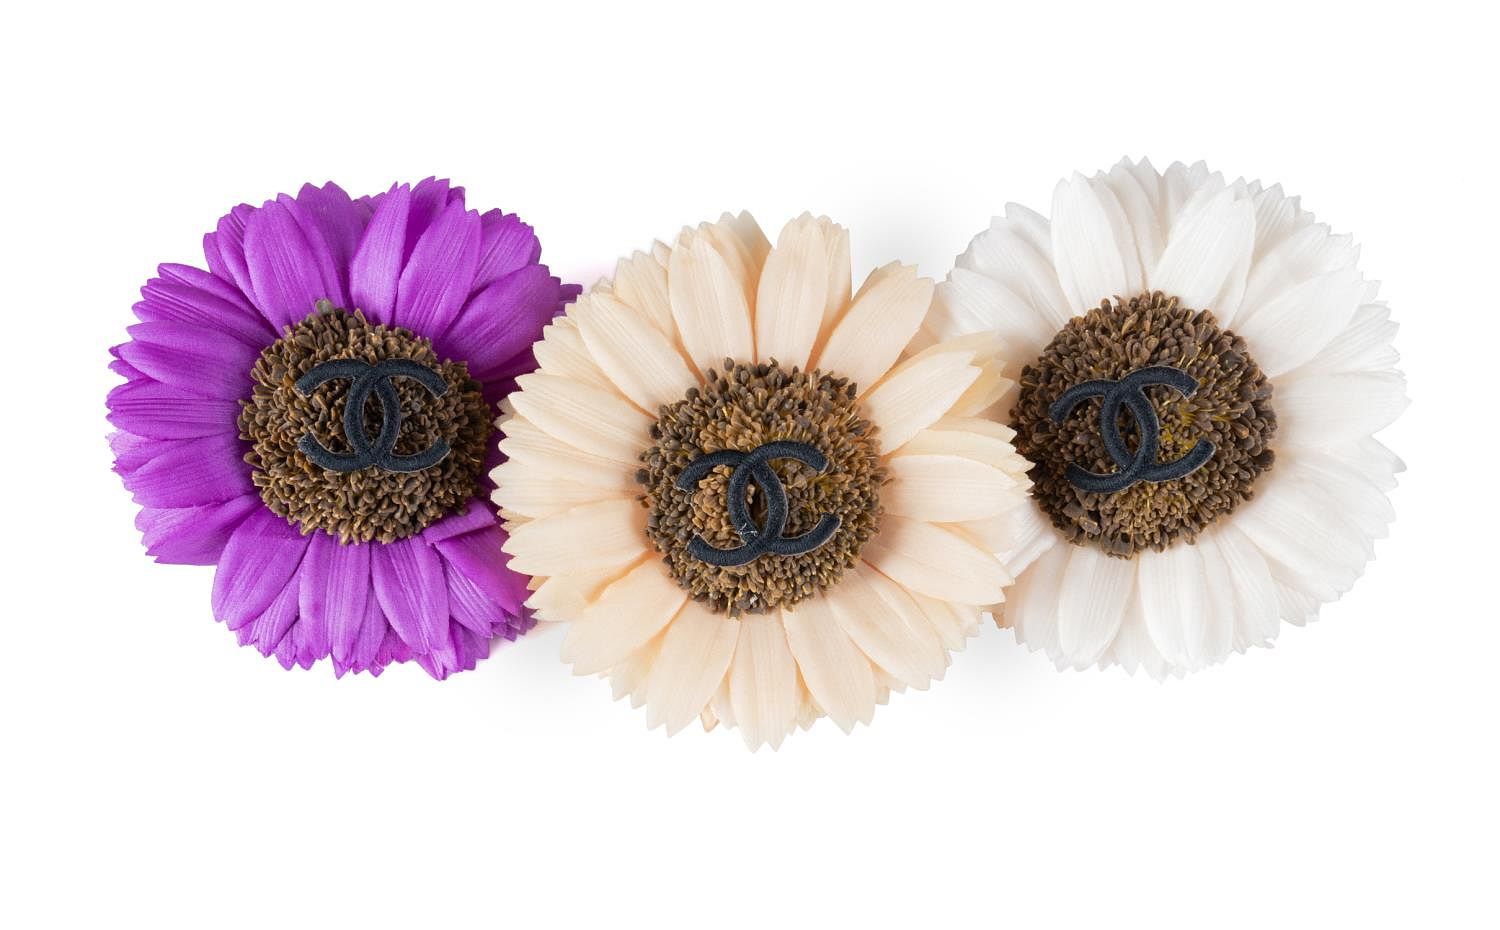 THREE VINTAGE CHANEL SUNFLOWERS BROOCHES for sale at auction on